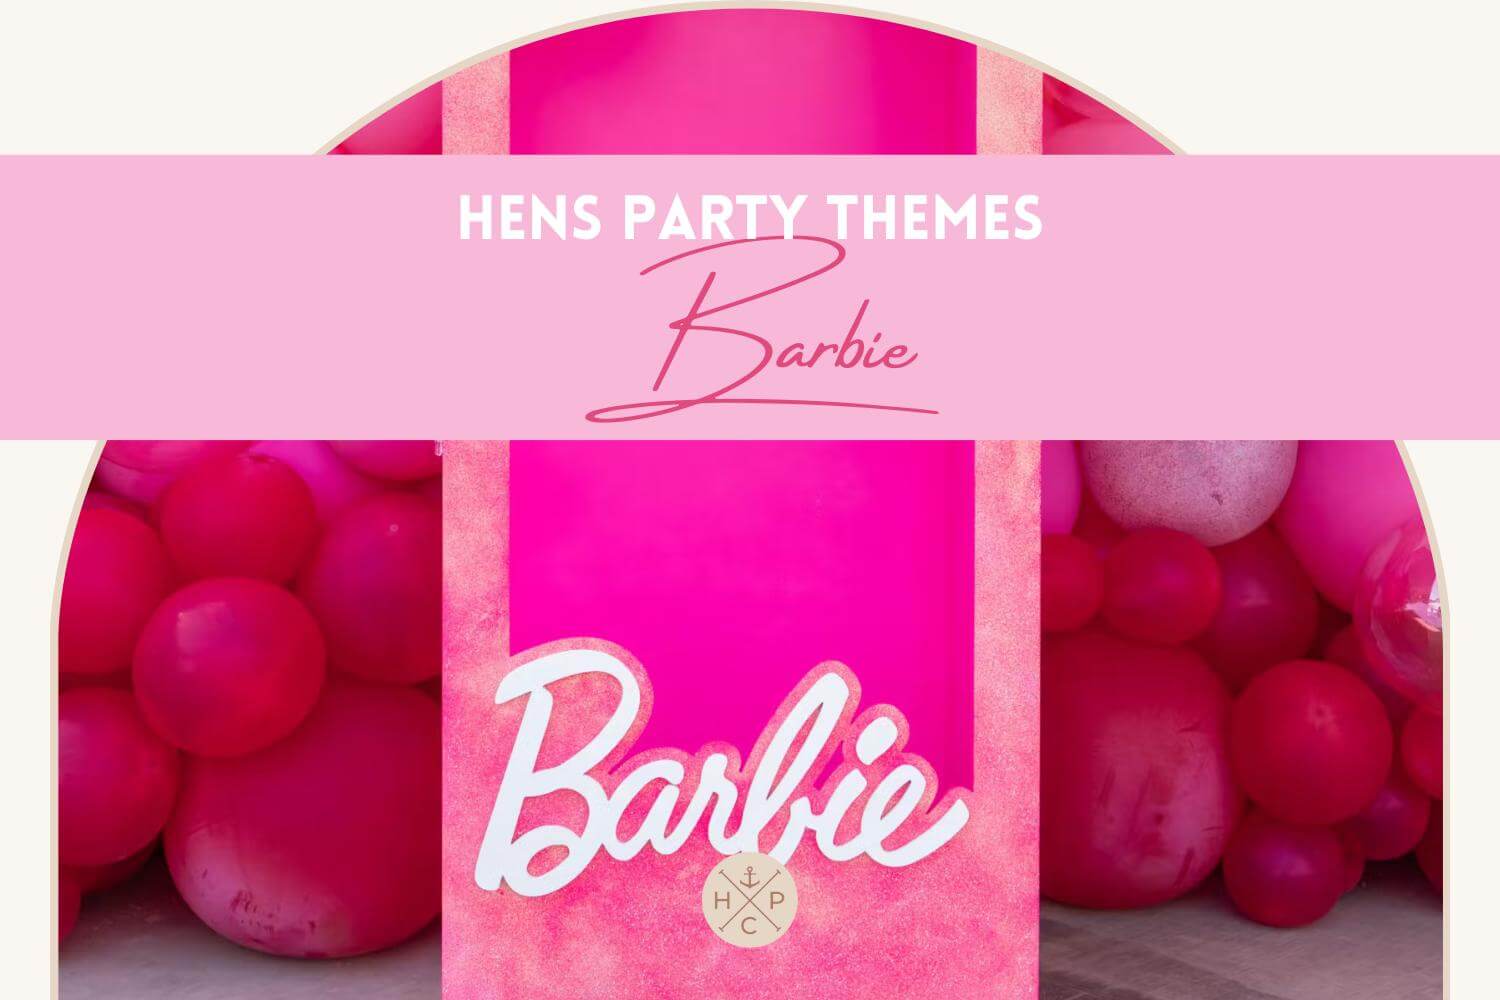 Barbie themed hens party